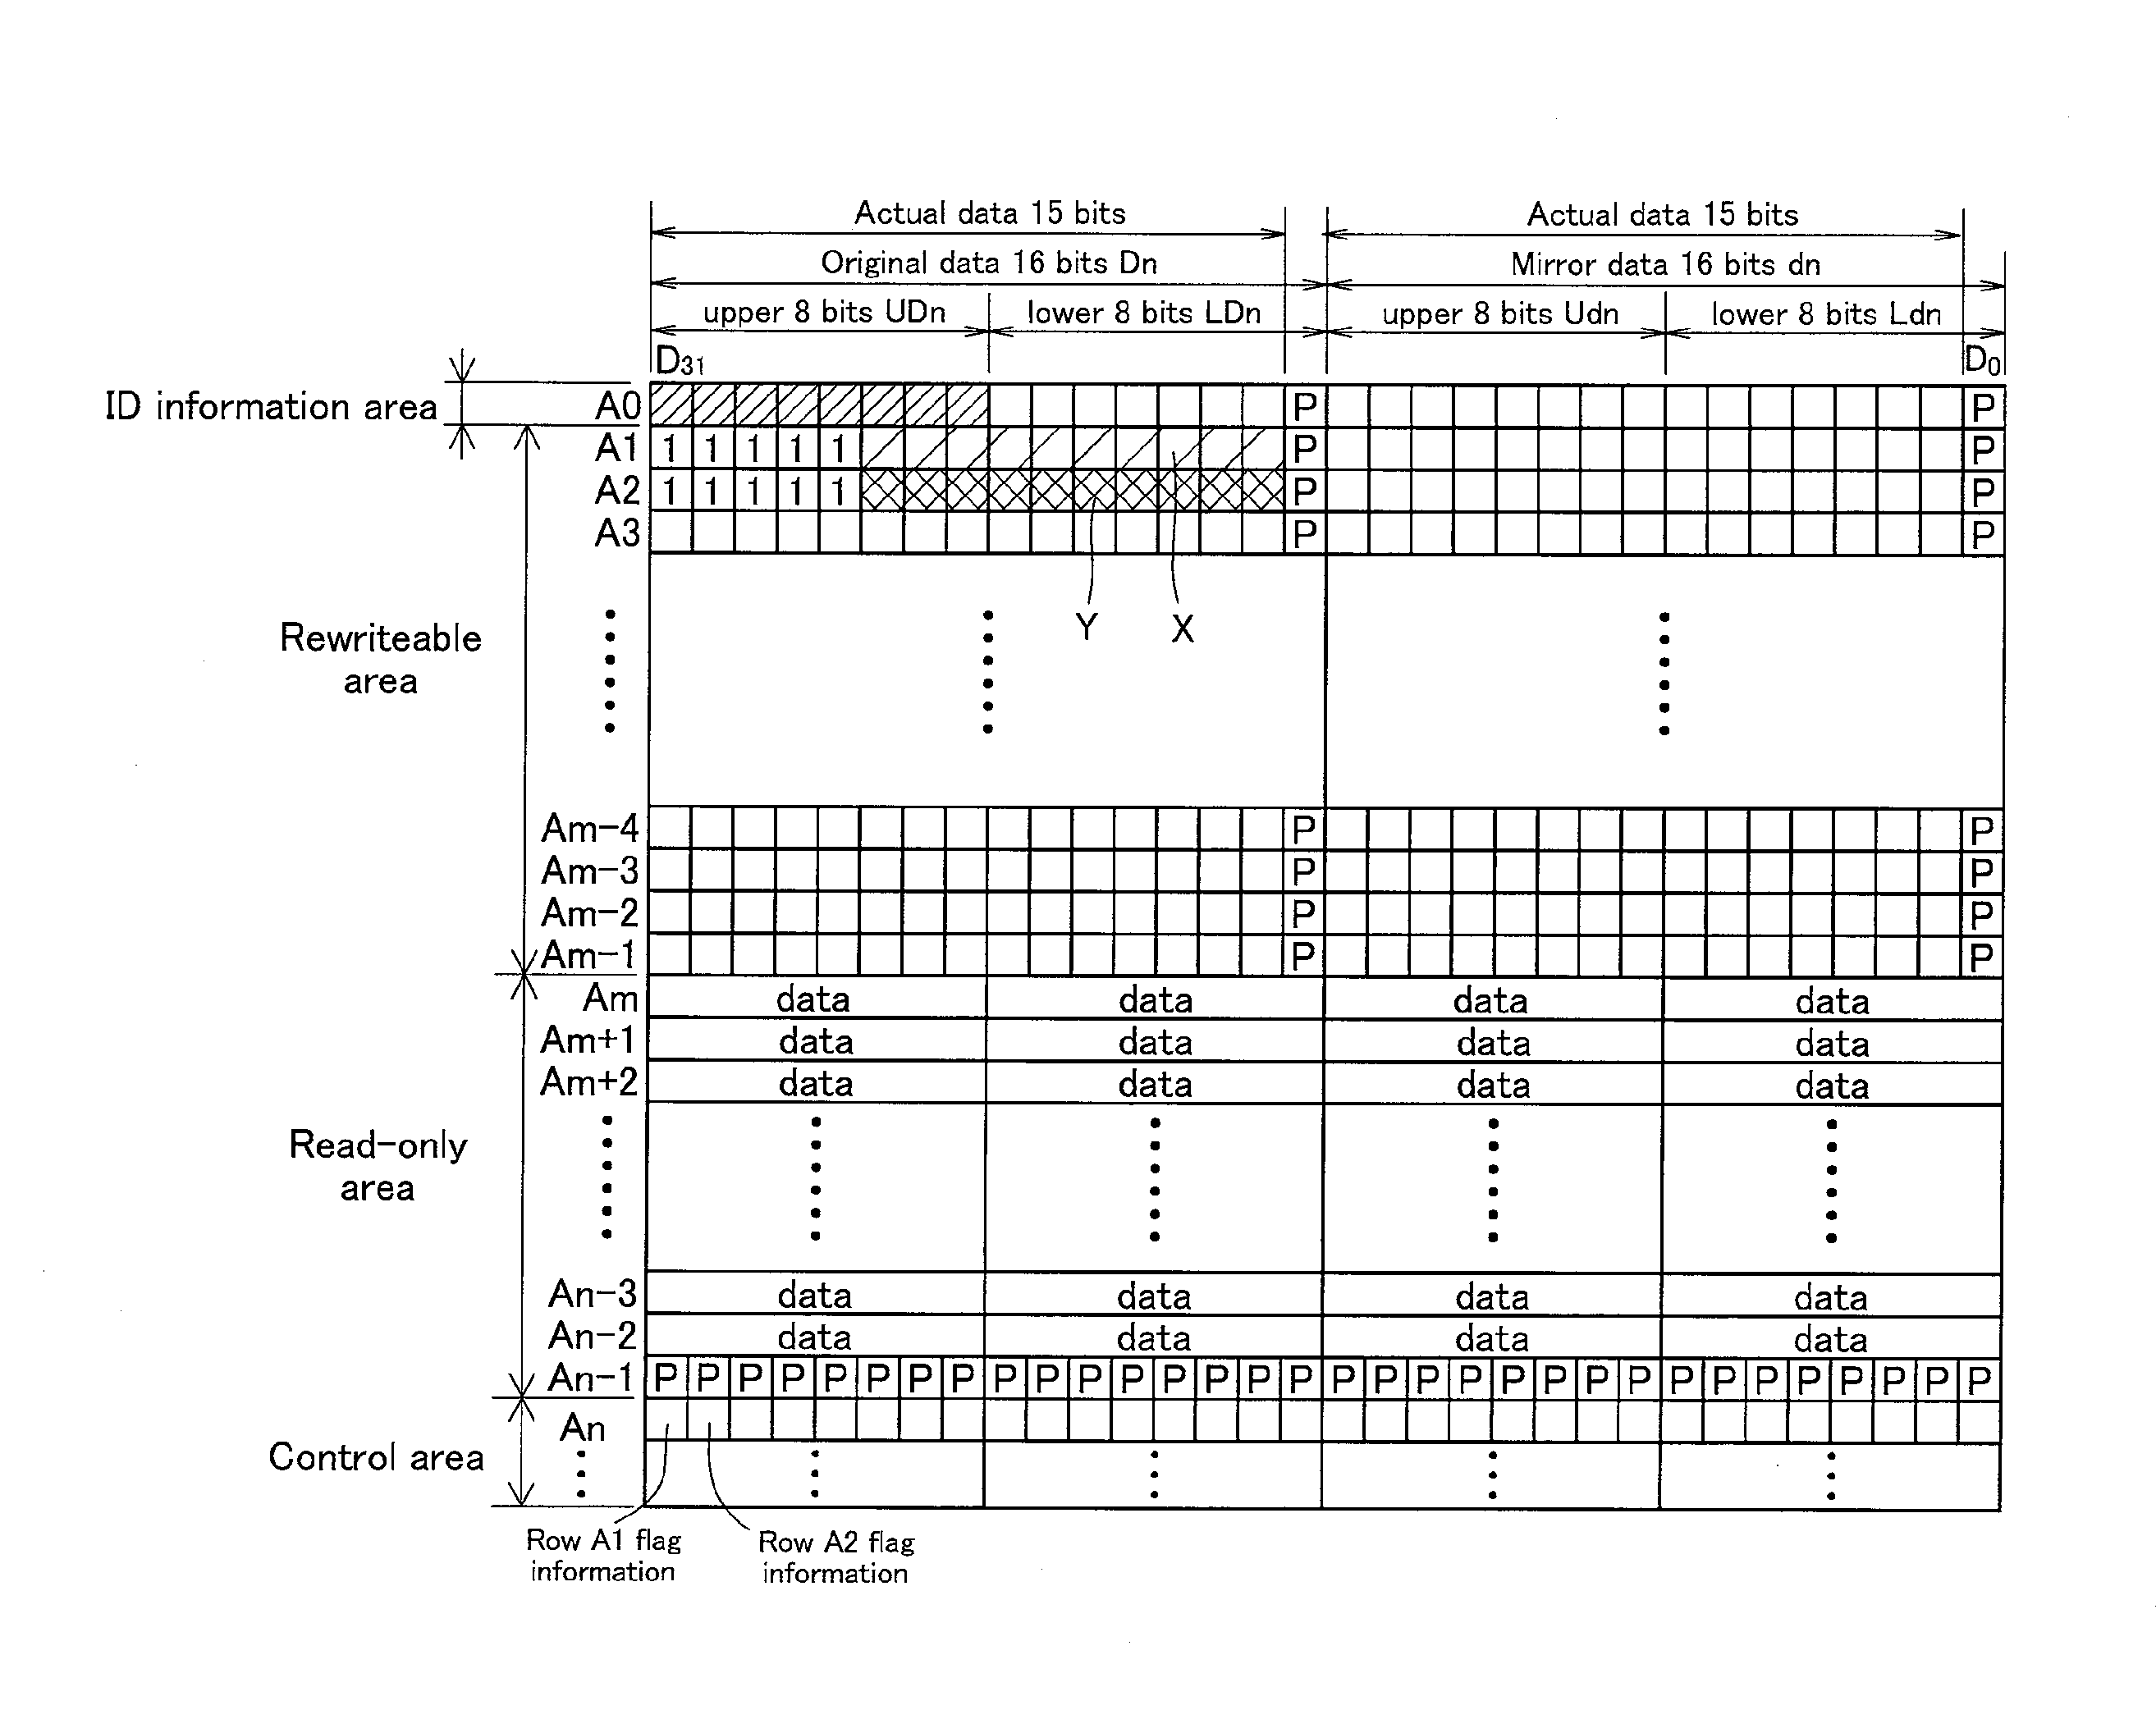 Memory device, host circuit, circuit board, liquid receptacle, method of transmitting data stored in a nonvolatile data memory section to a host circuit, and system including a host circuit and a memory device detachably attachable to the host circuit